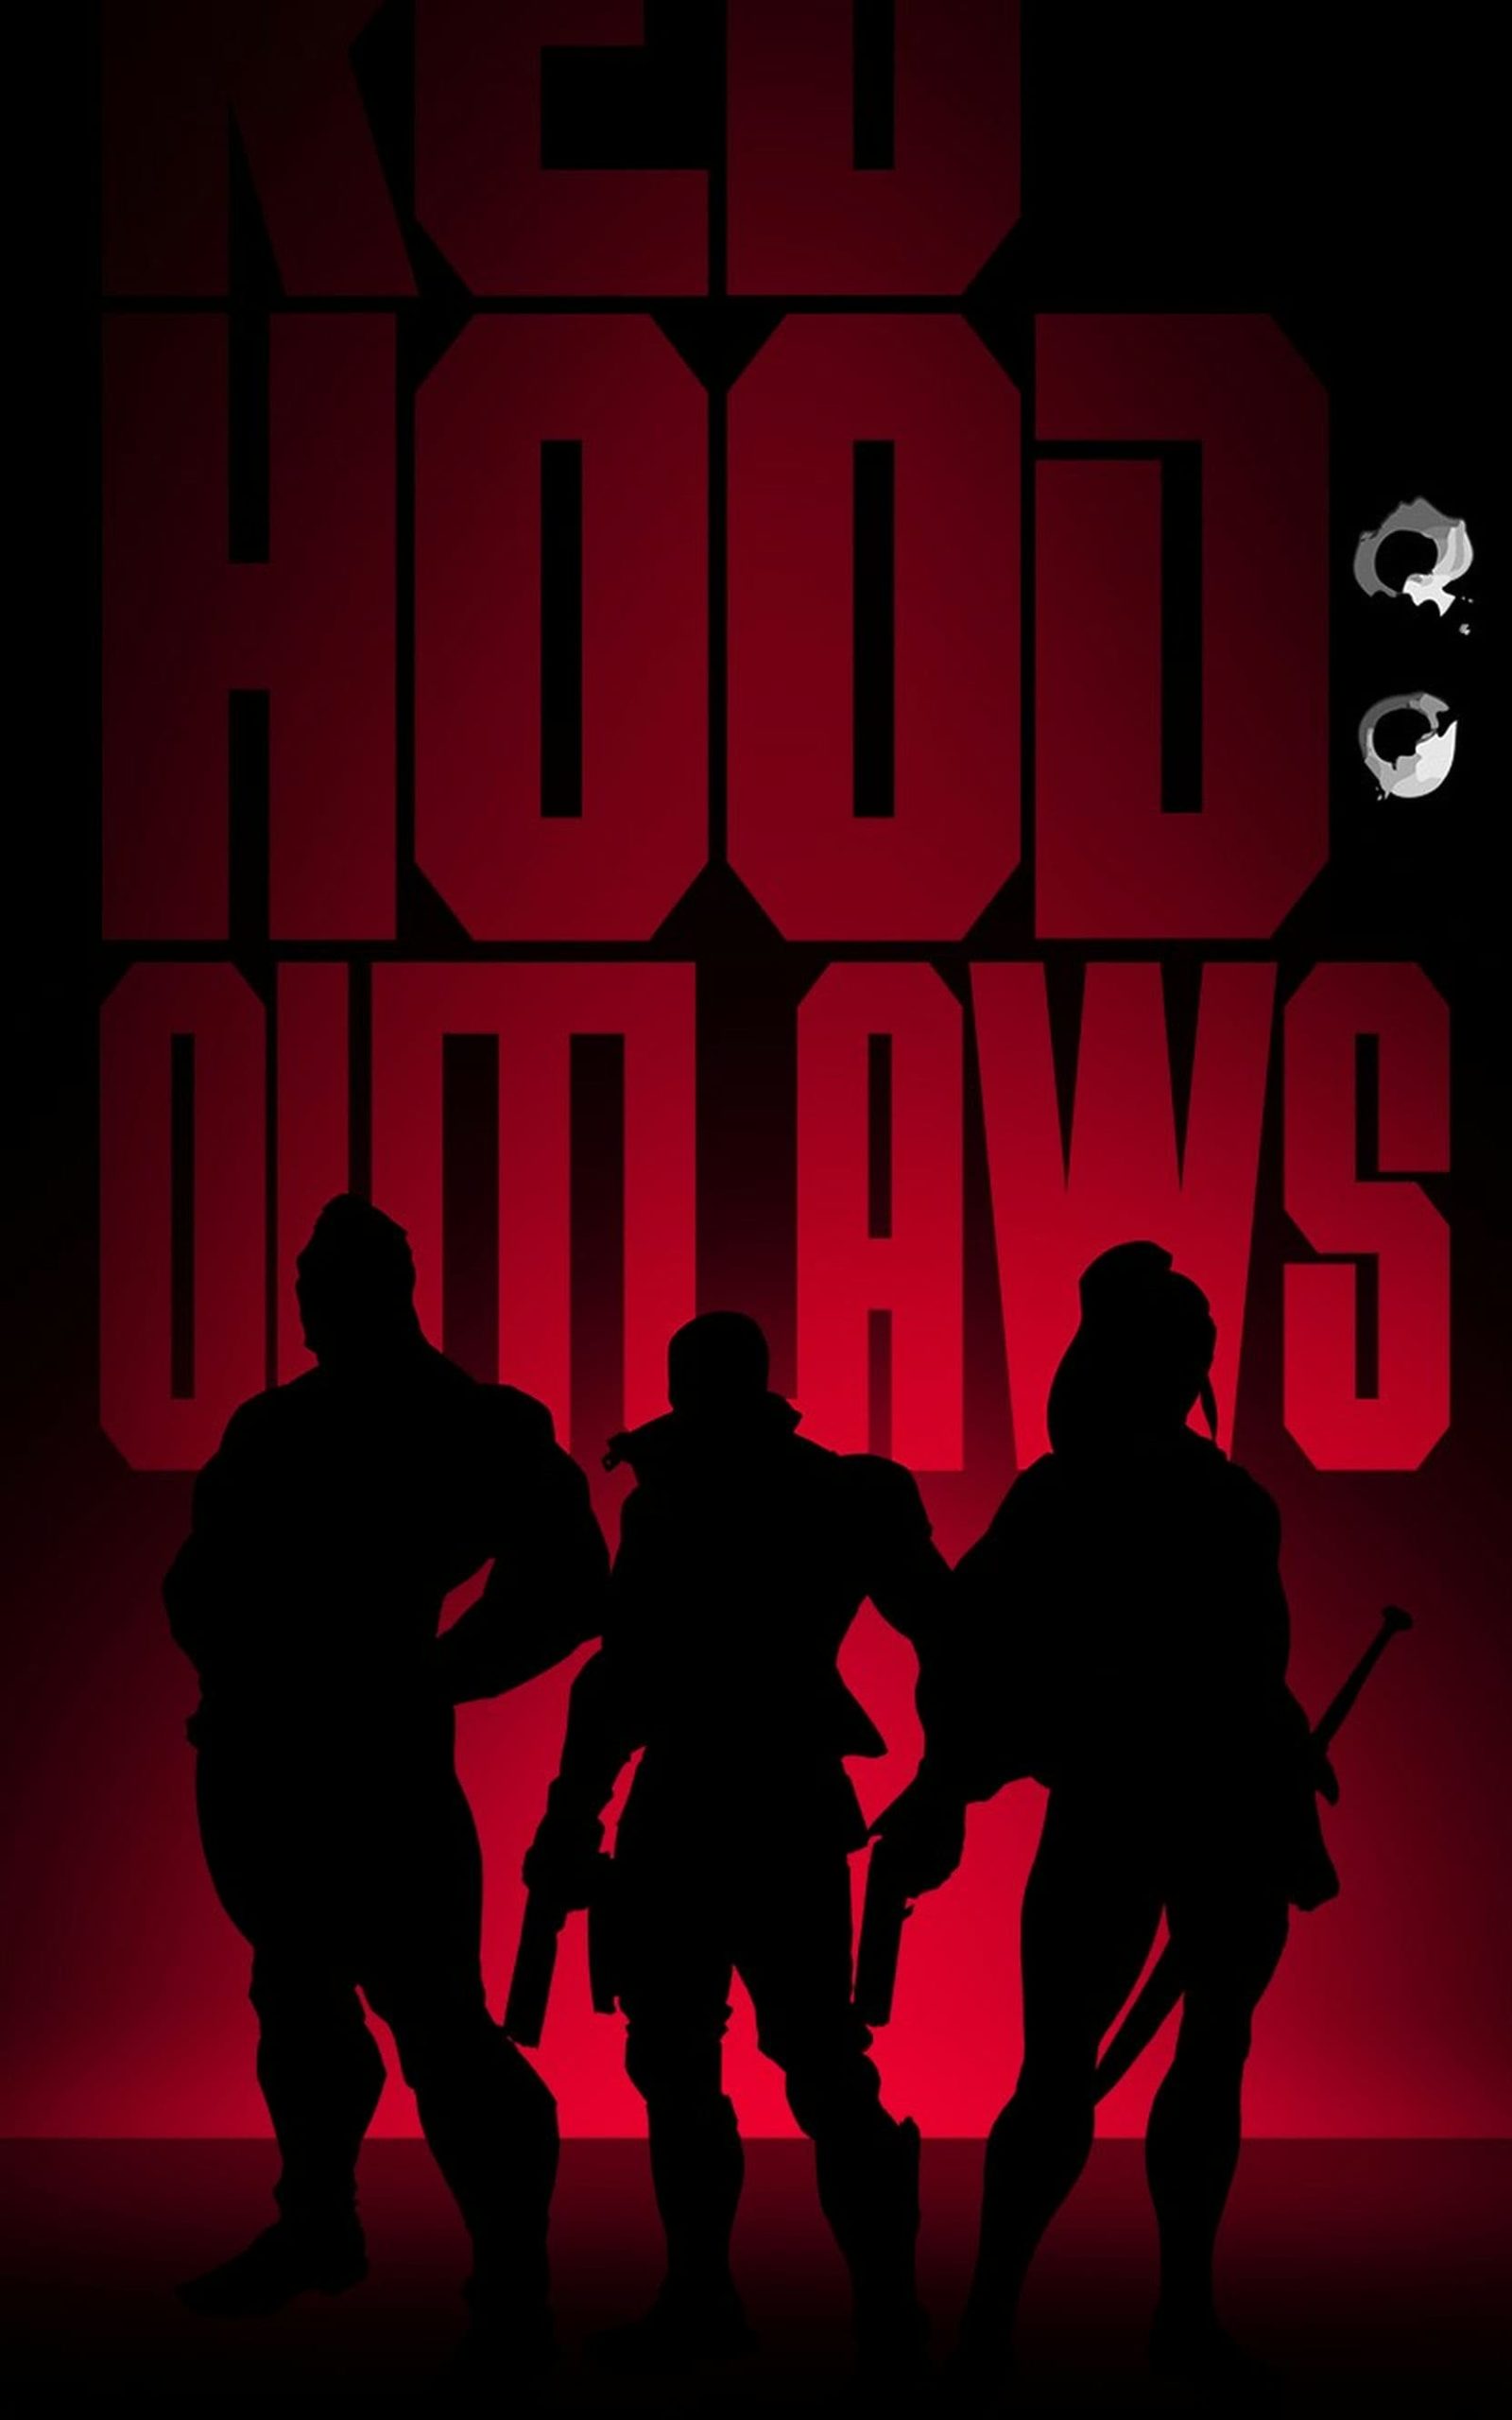 https://langgeek.net/wp-content/webpc-passthru.php?src=https://langgeek.net/wp-content/uploads/2022/12/Red-Hood-Outlaws-007-The-Real-You-047-scaled.jpg&nocache=1